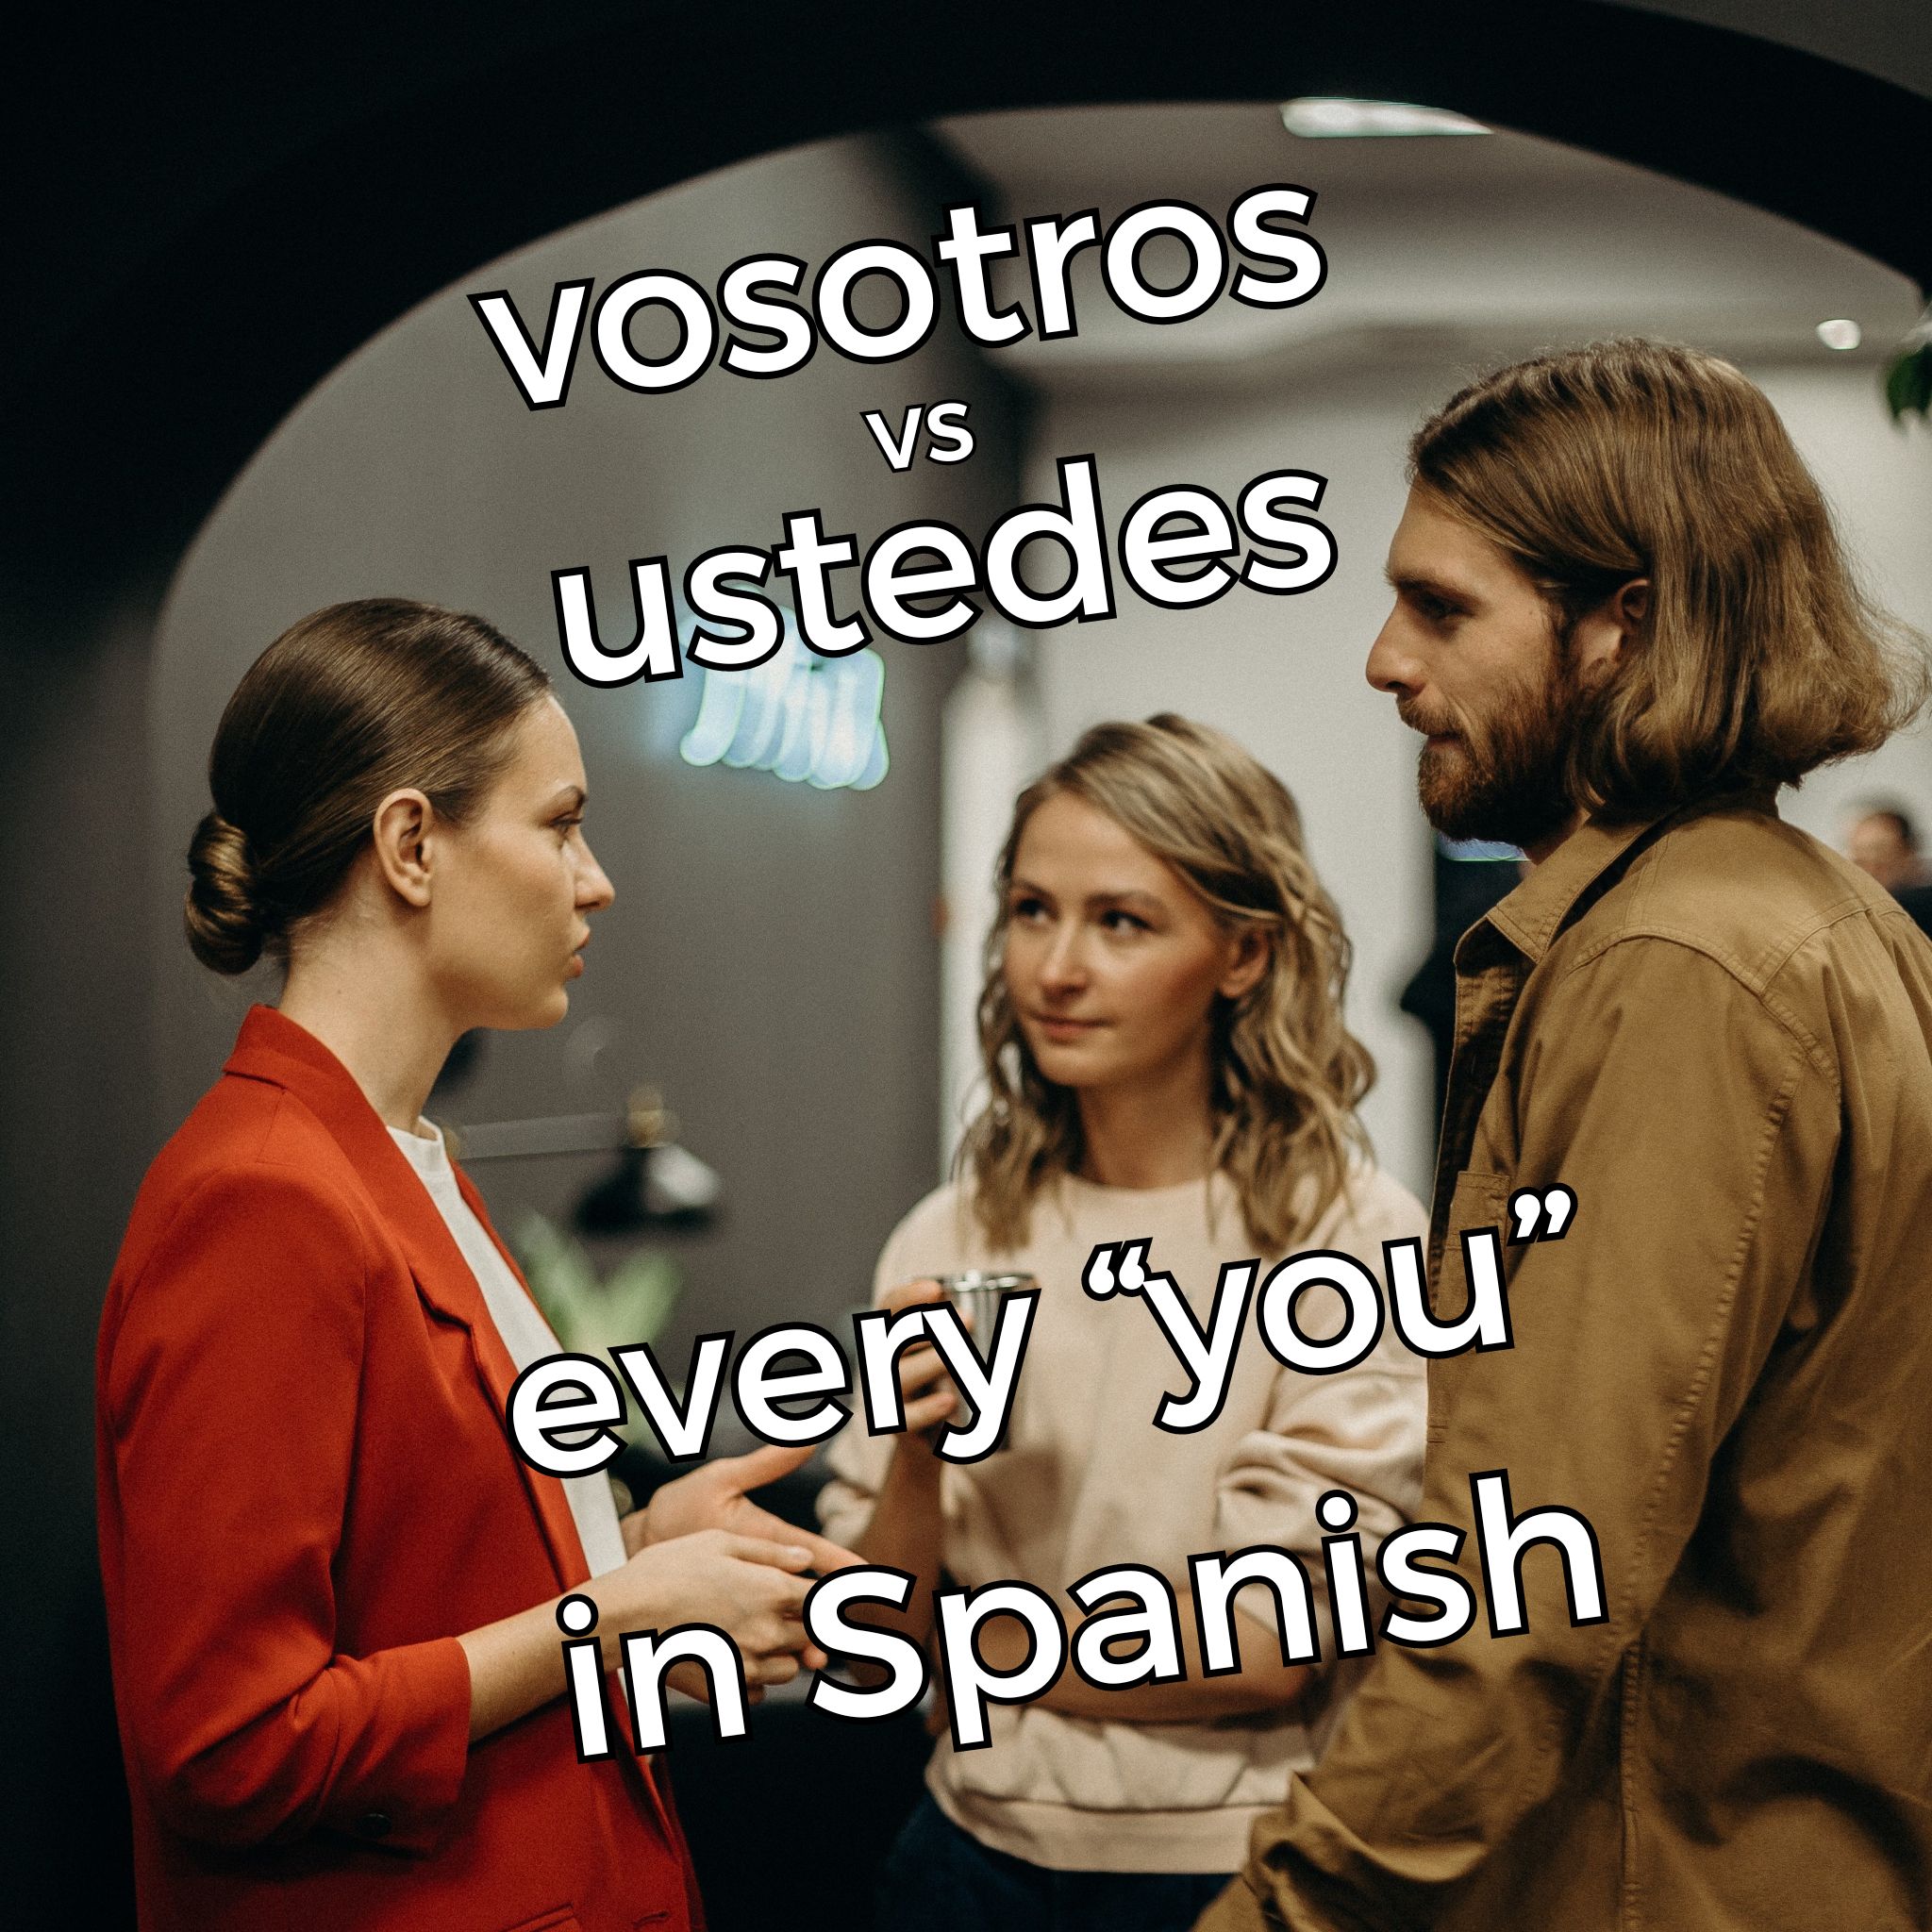 vosotros vs ustedes: every You in Spanish